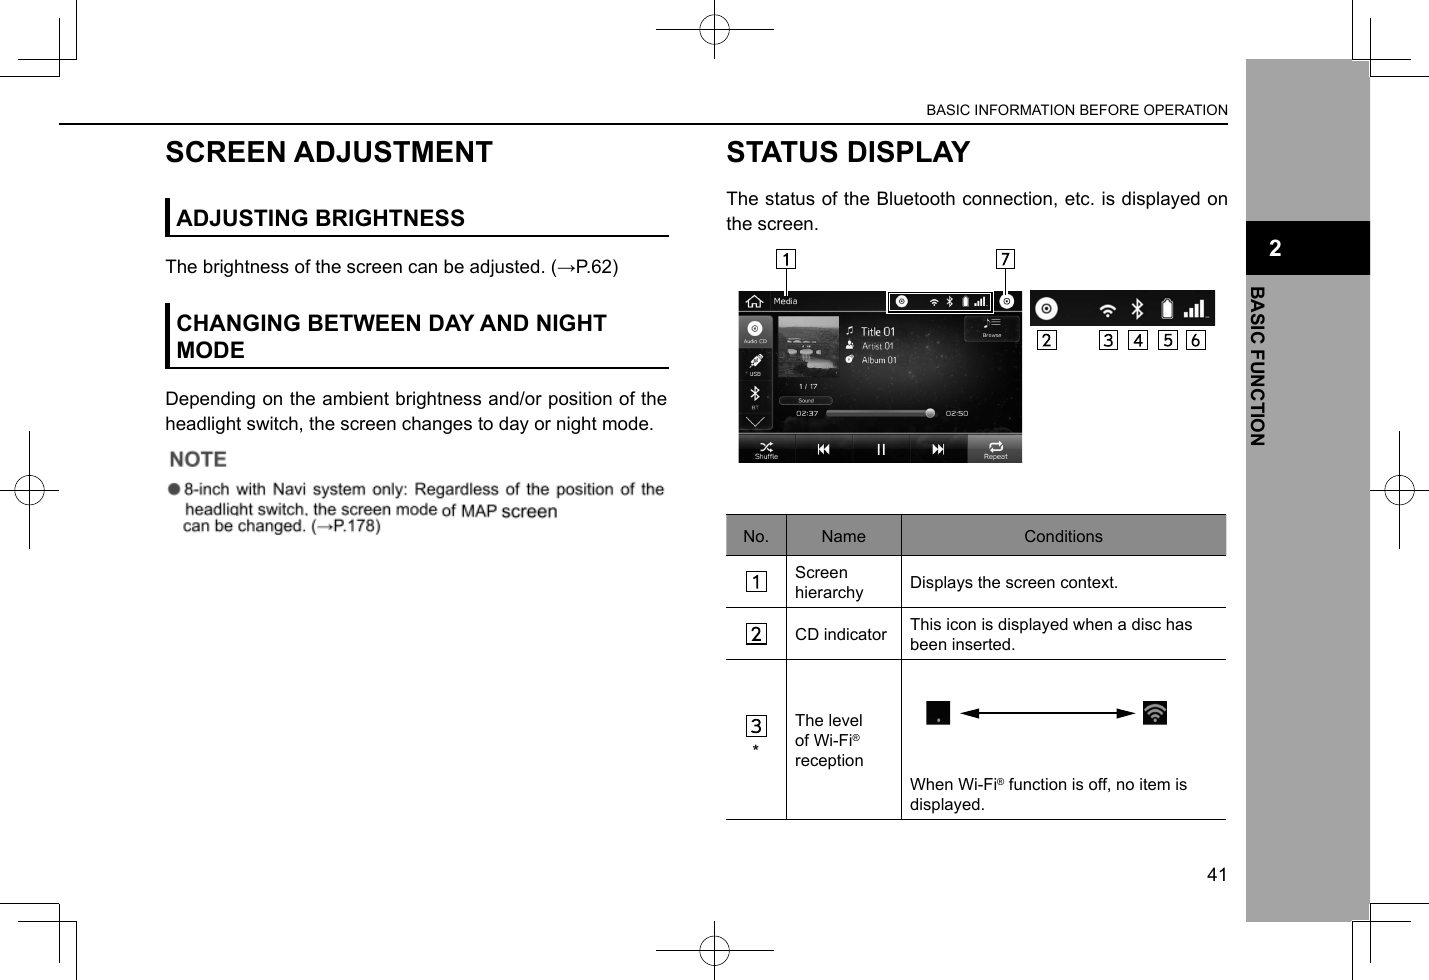 SCREEN ADJUSTMENTADJUSTING BRIGHTNESSThe brightness of the screen can be adjusted. (→P.62)CHANGING BETWEEN DAY AND NIGHT MODEDepending on the ambient brightness and/or position of the headlight switch, the screen changes to day or night mode.STATUS DISPLAYThe status of the Bluetooth connection, etc. is displayed on the screen.No. Name ConditionsScreen hierarchy Displays the screen context.CD indicator This icon is displayed when a disc has been inserted.*The level of Wi-Fi® receptionWhen Wi-Fi® function is off, no item is displayed.BASIC INFORMATION BEFORE OPERATION41BASIC FUNCTION2